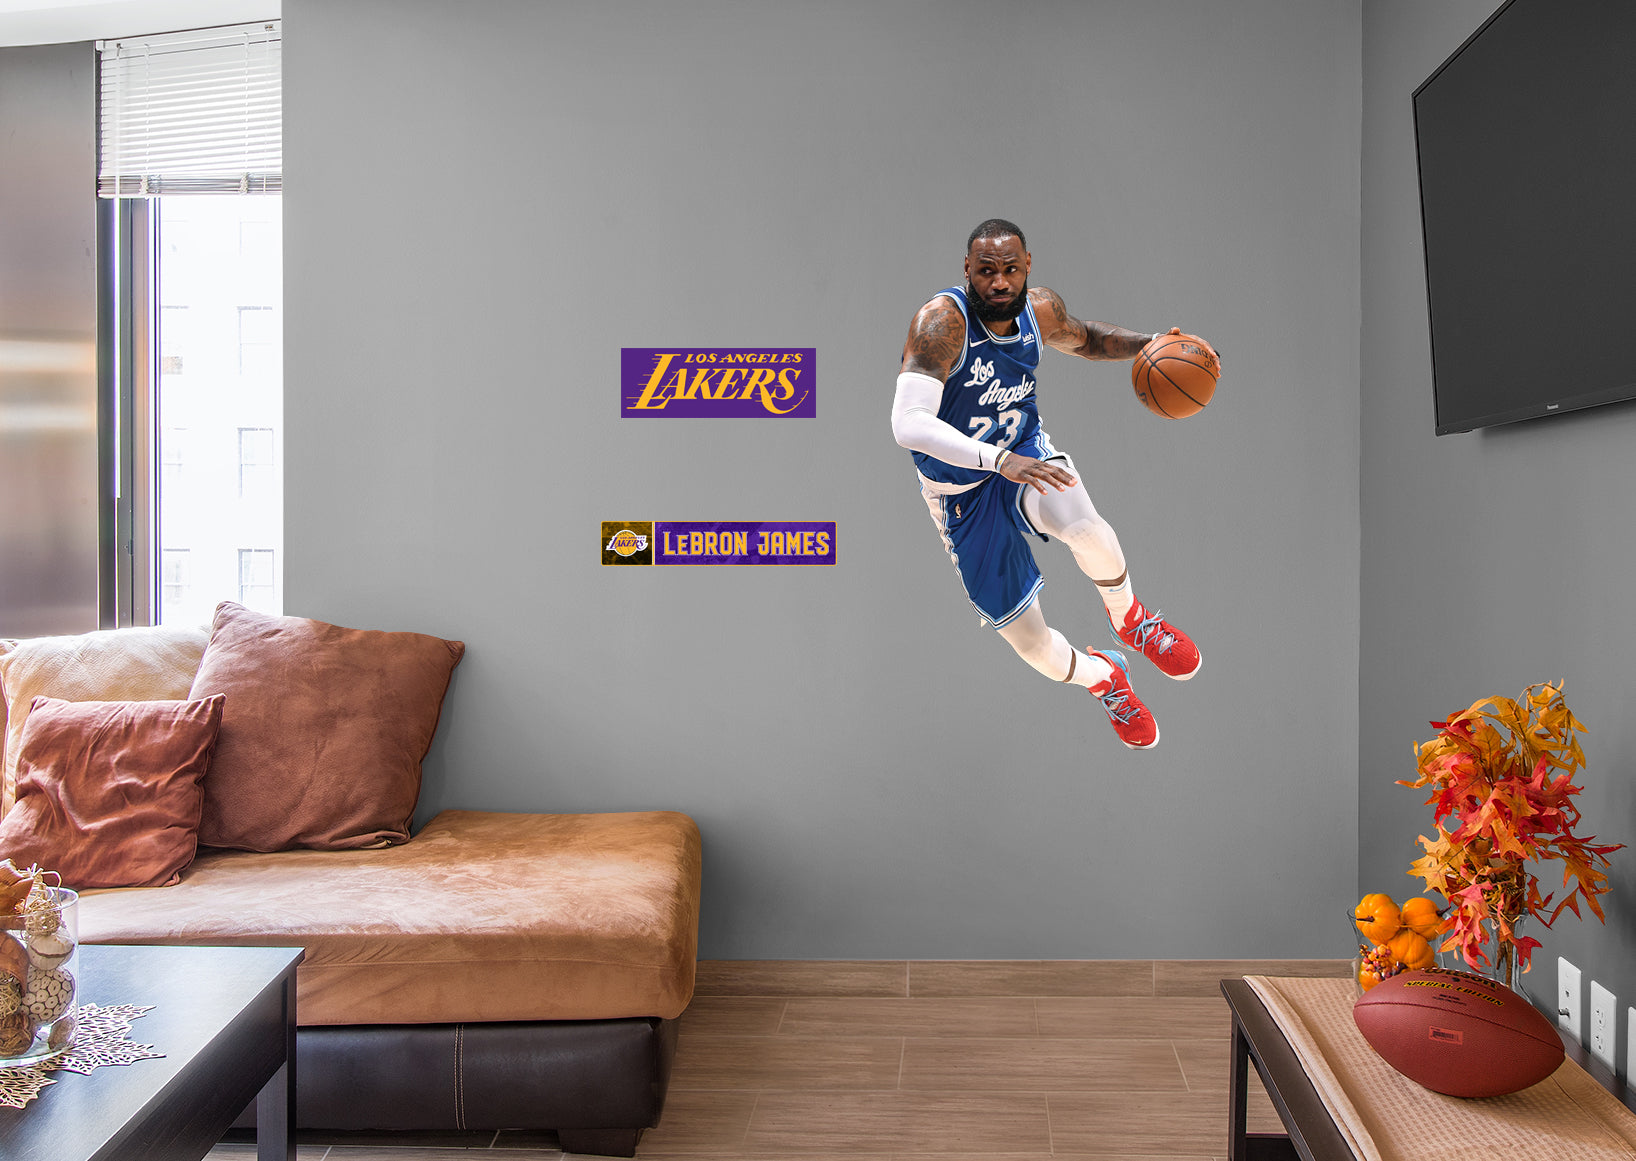 LeBron James 2021 Blue Jersey for Los Angeles Lakers - Officially Licensed NBA Removable Wall Decal Giant Athlete + 2 Decals (31